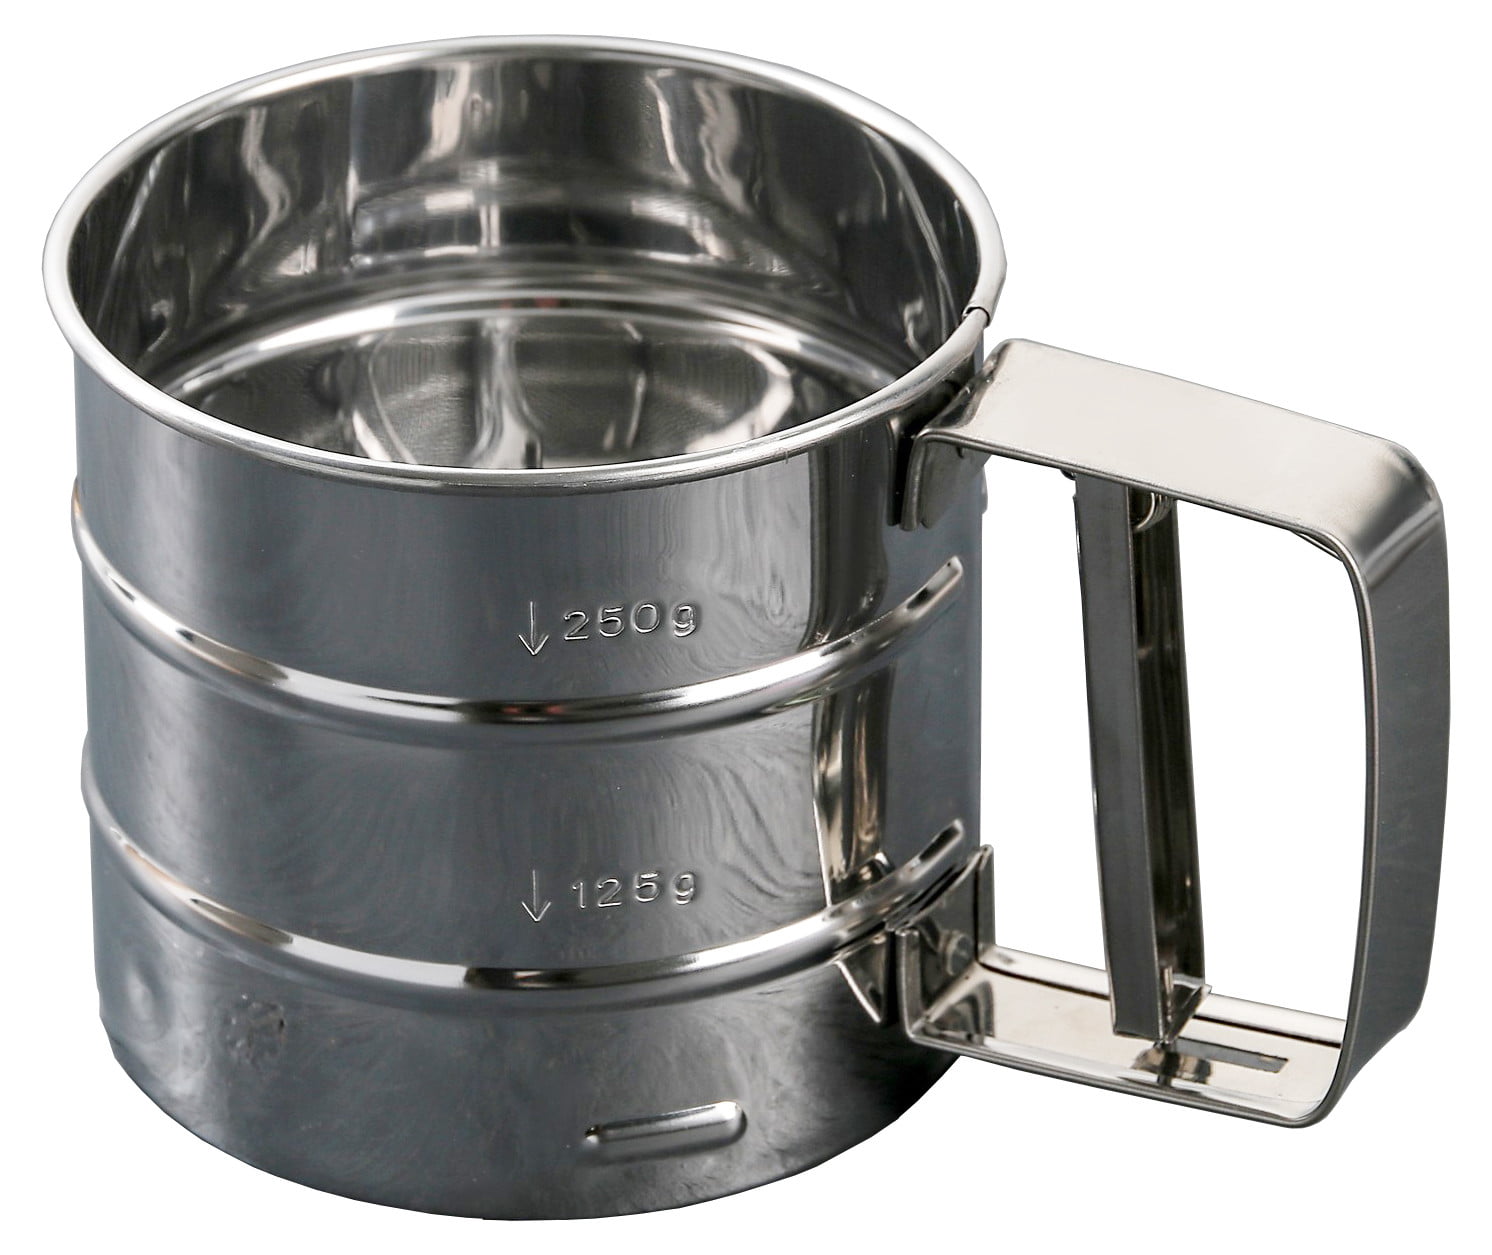 Cup Style Flour Sieve Stainless Steel Flour Sifter For Baking,Flour Sifter With Crank Dishwasher Safe 4 x 3.7 inche